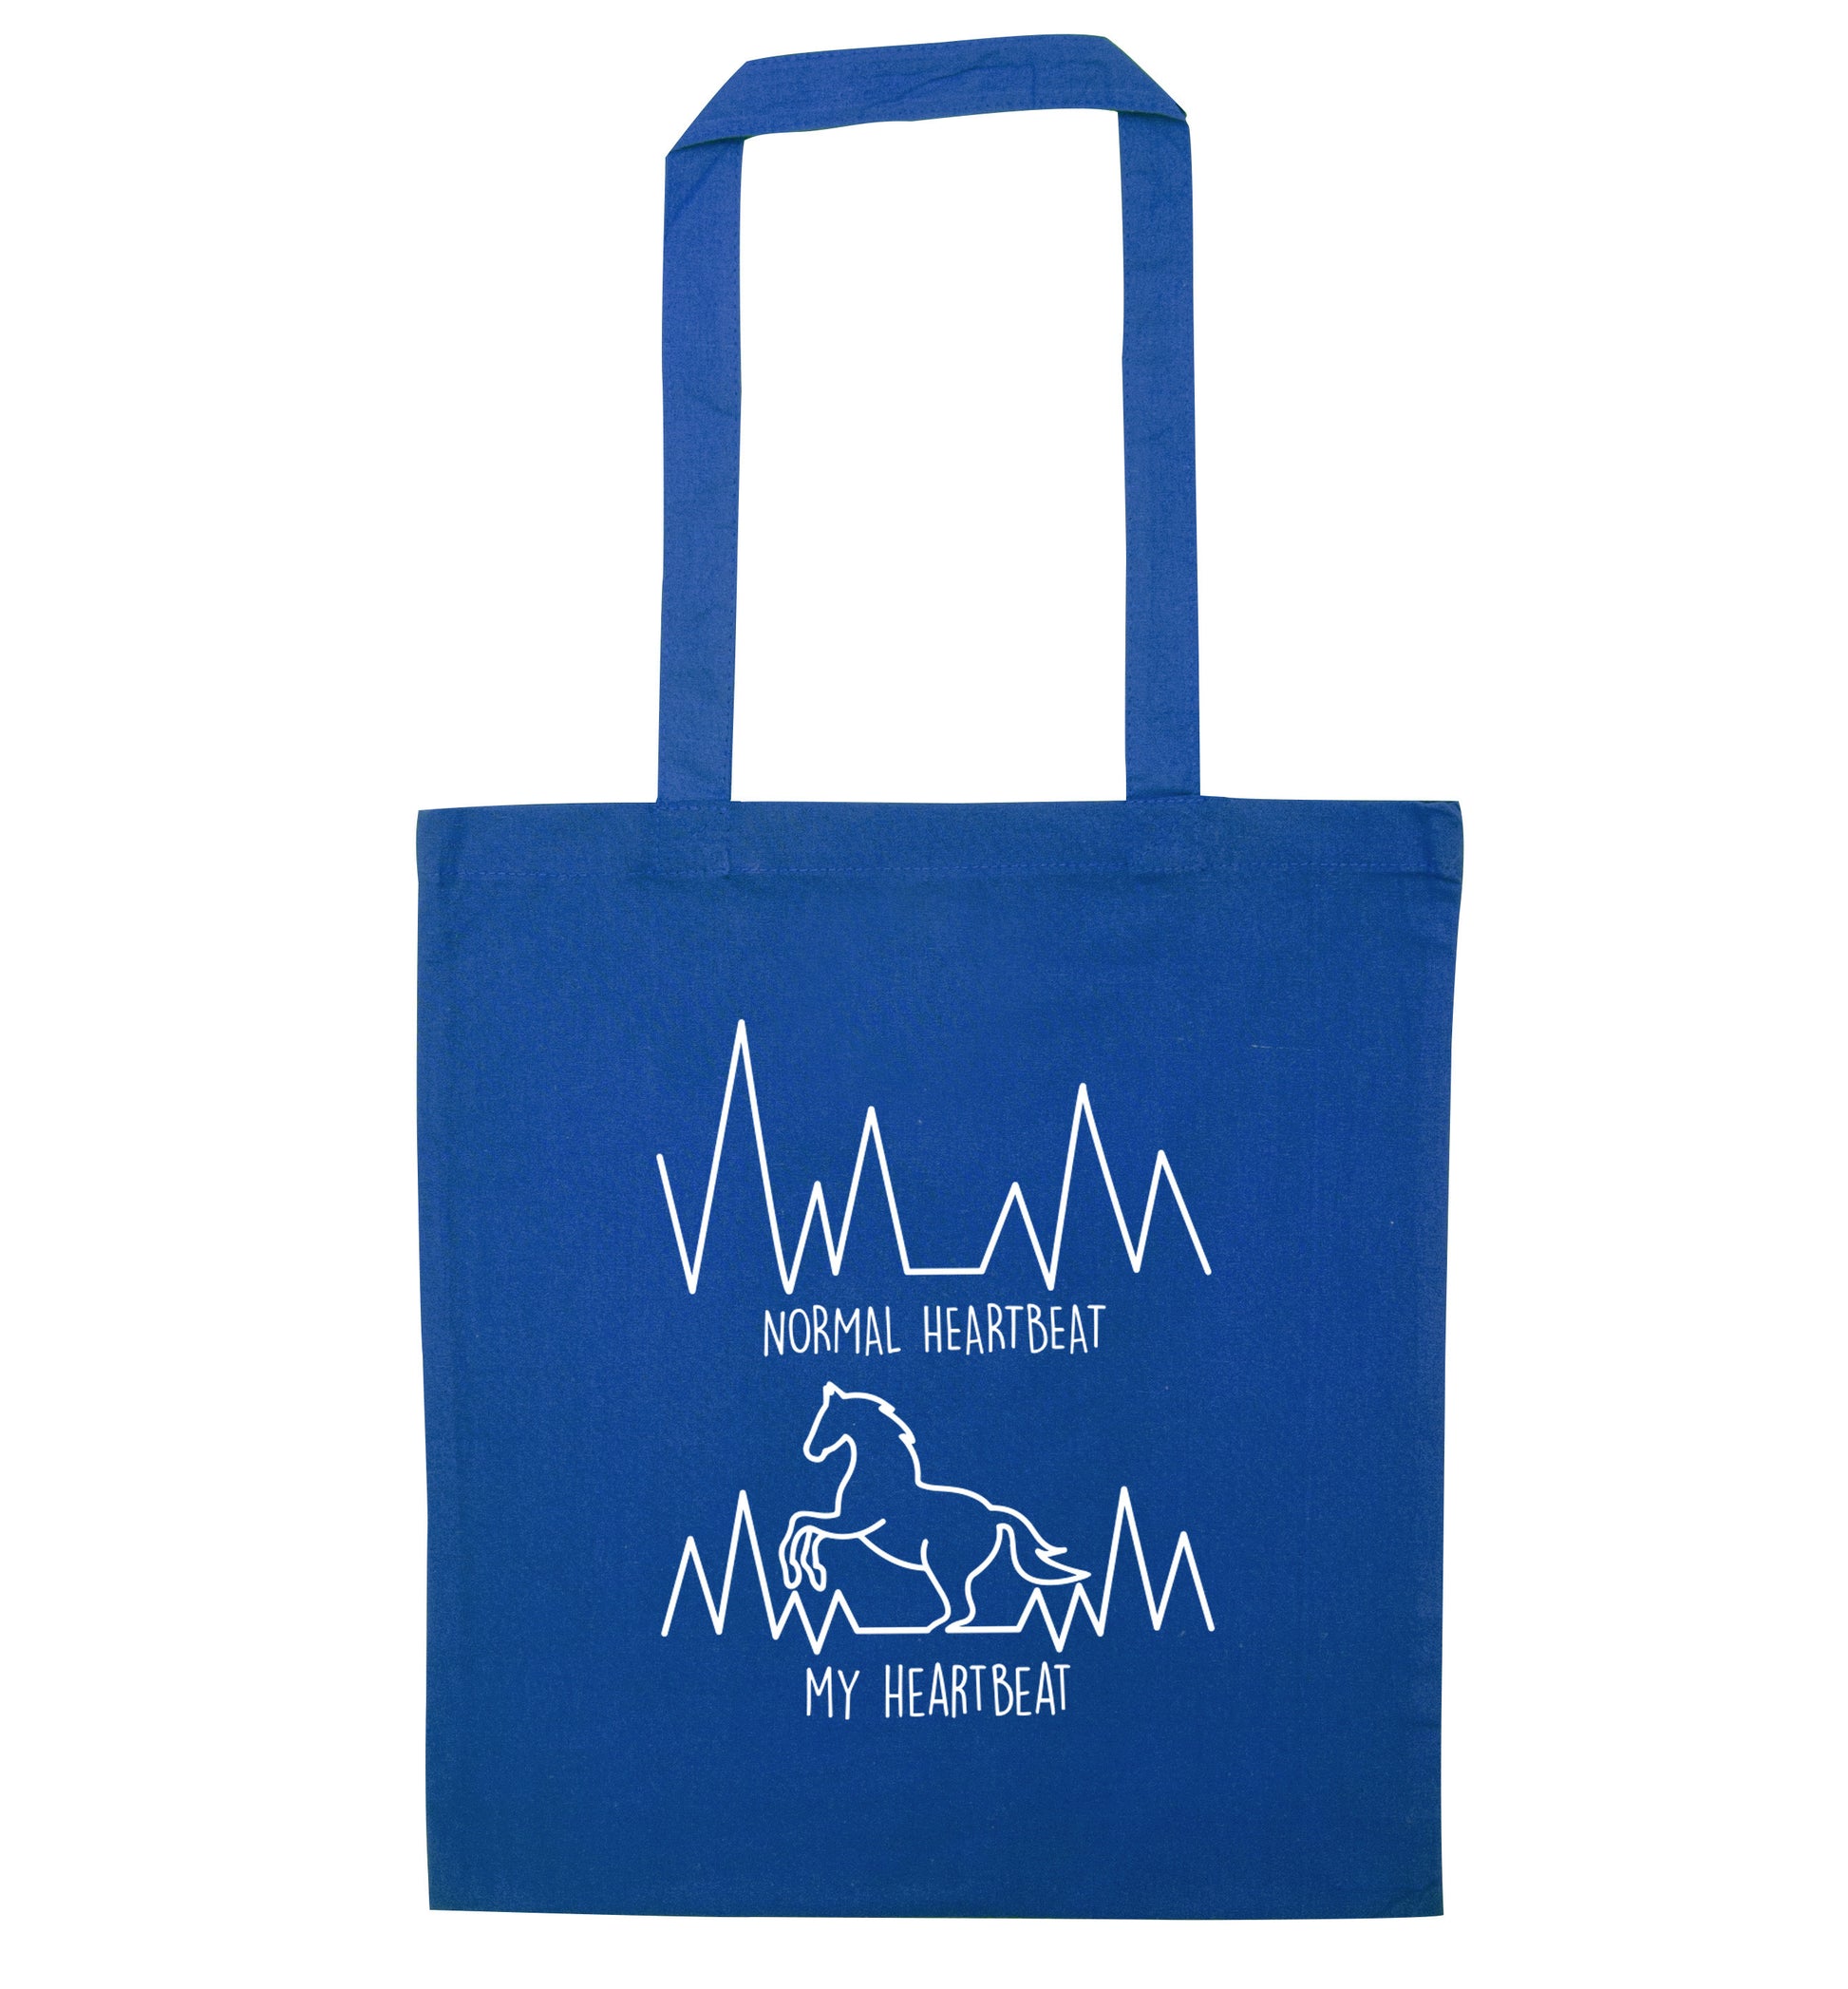 Normal heartbeat, my heartbeat horse lover blue tote bag